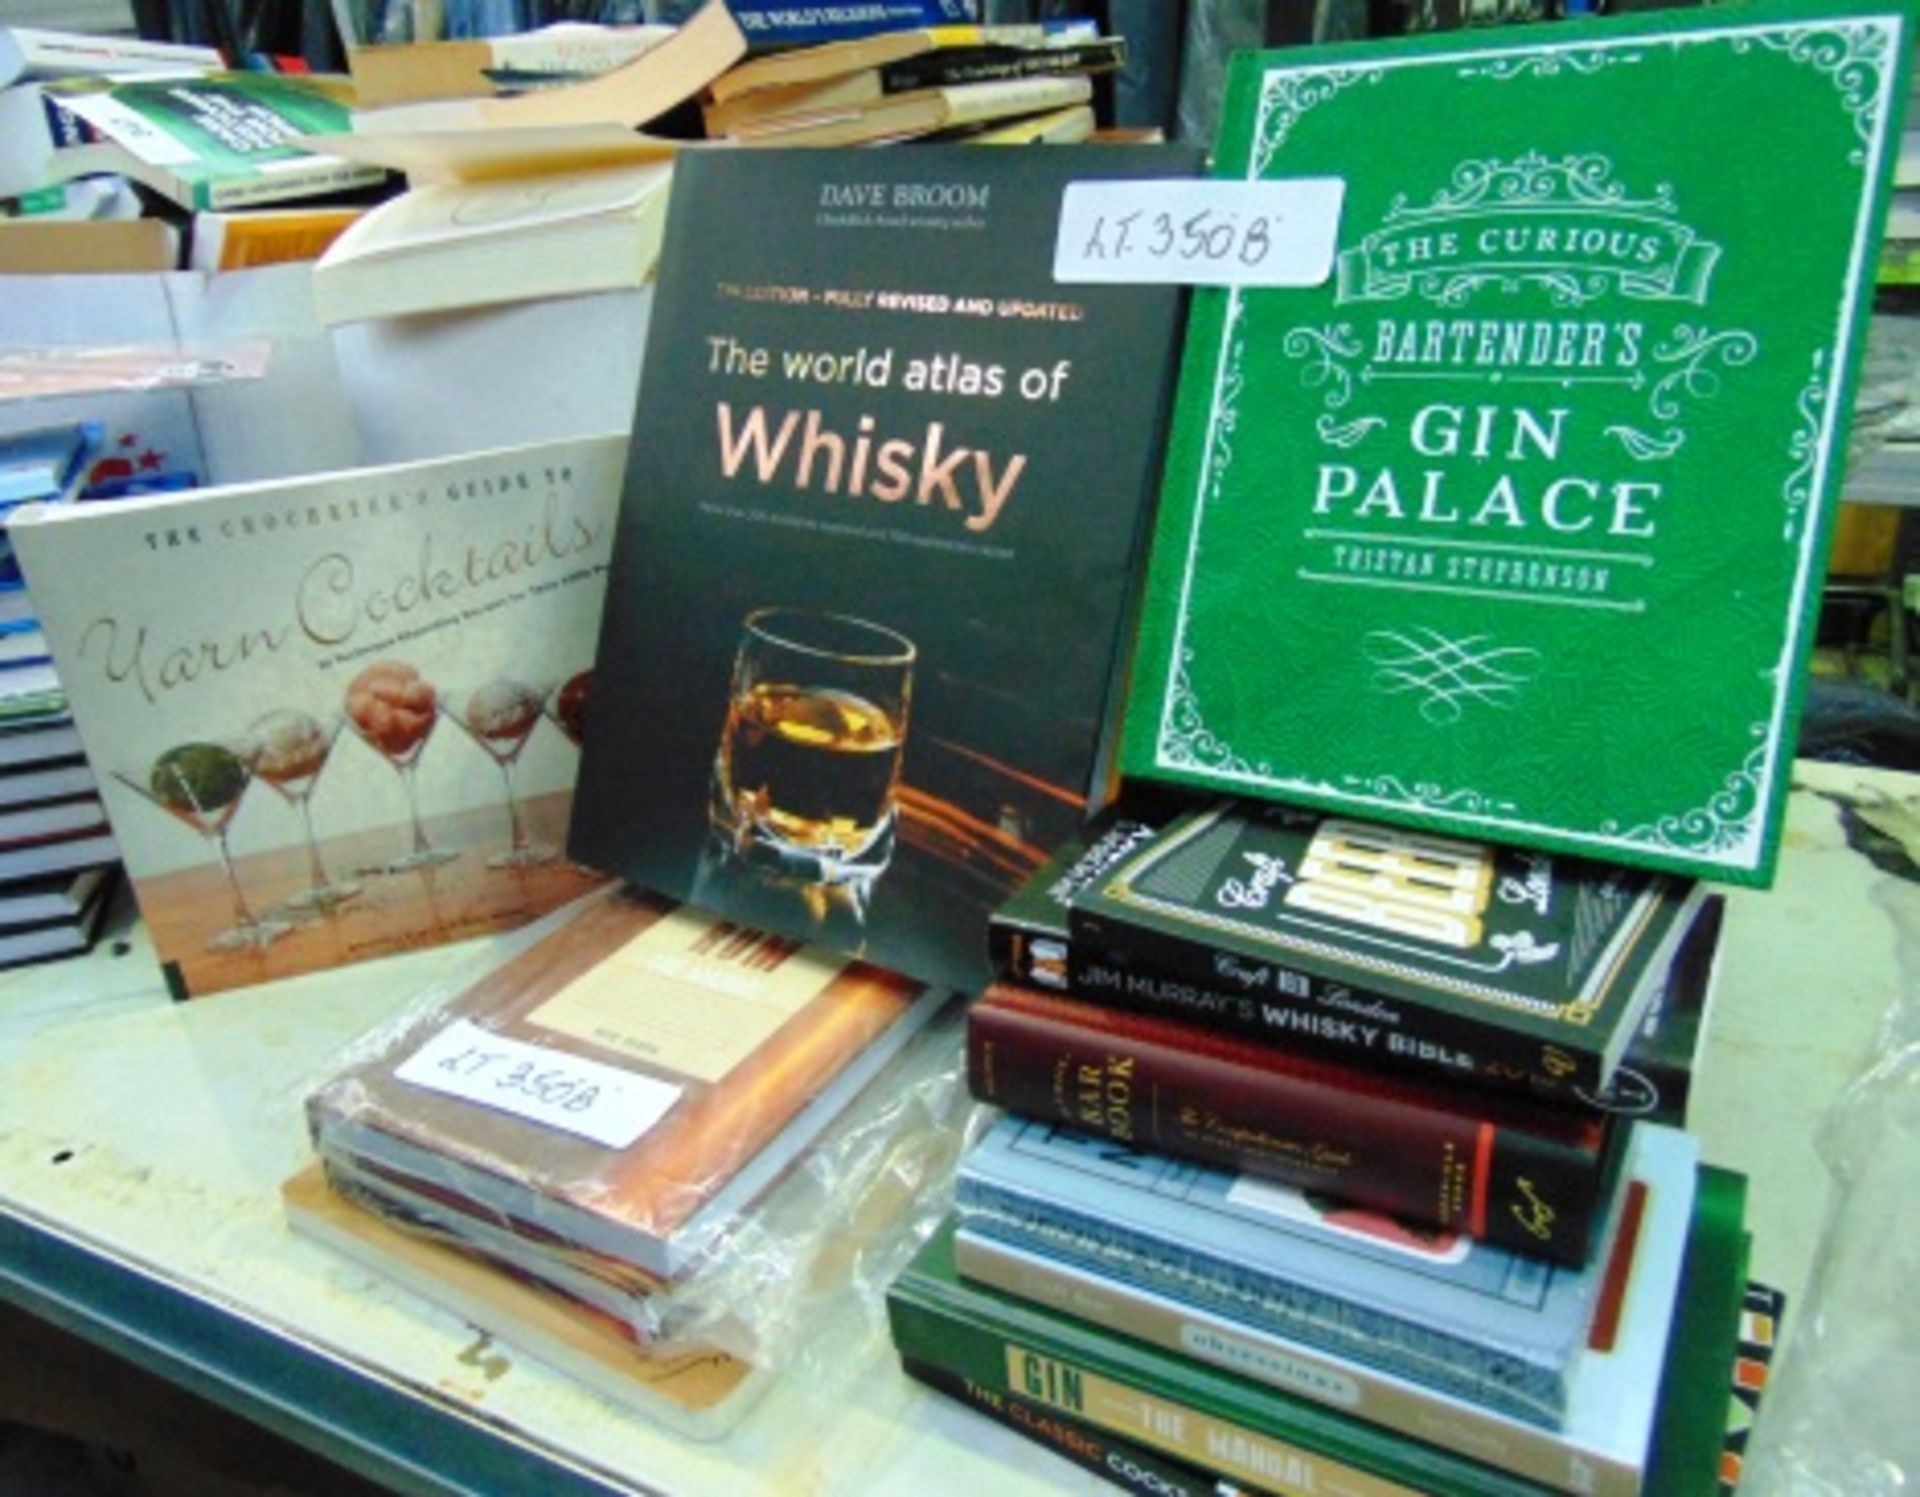 13 Assorted books on drink including The World Atlas of Whisky by David Broom and The Curious